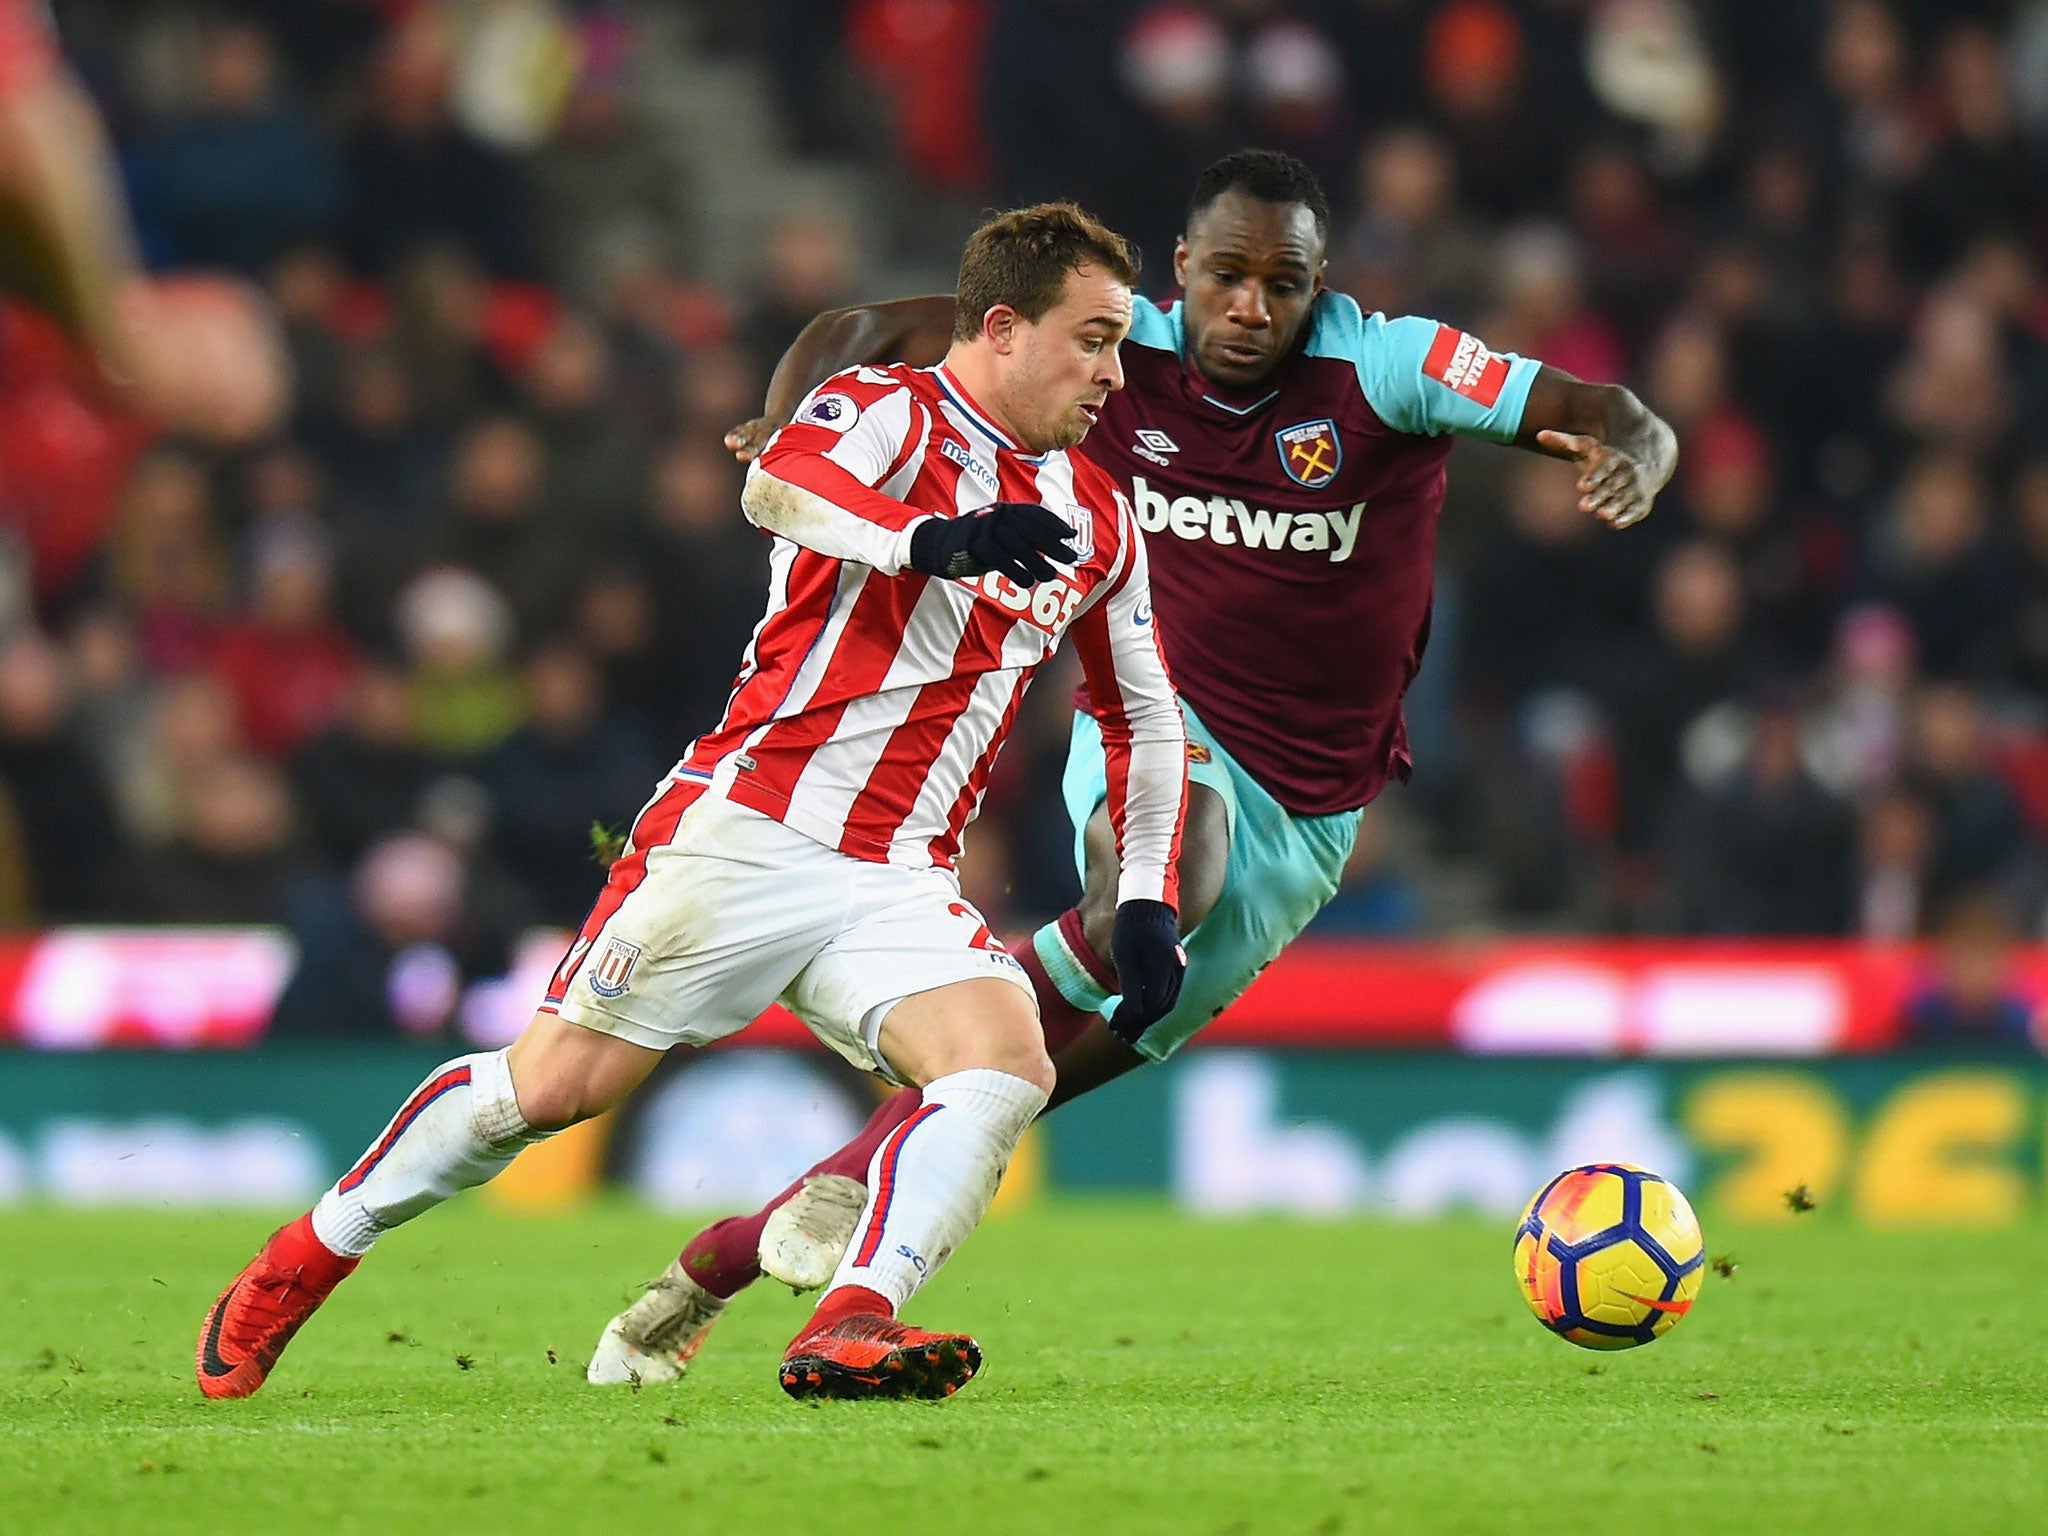 West Ham vs Stoke, Premier League: What time does it start, where can I watch it and what are the odds?